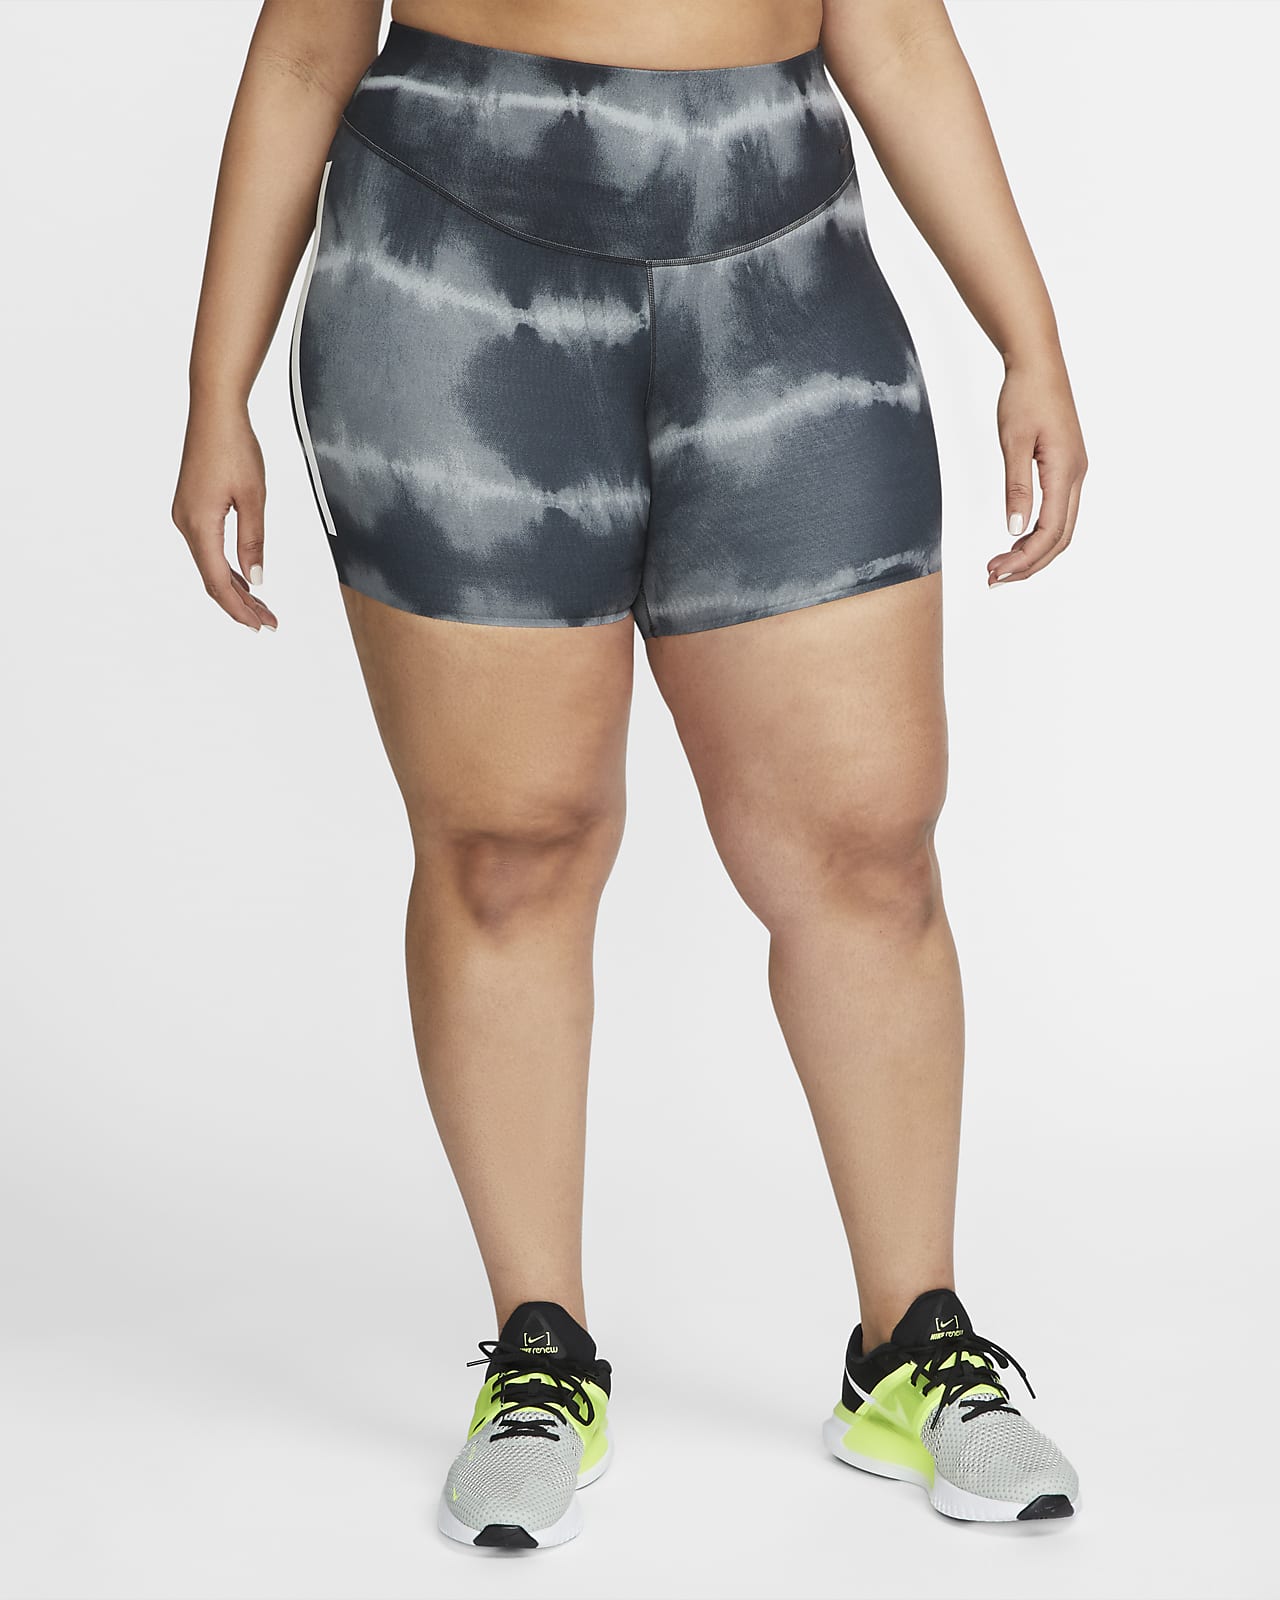 Women's Nike One Luxe Tight Plus Size